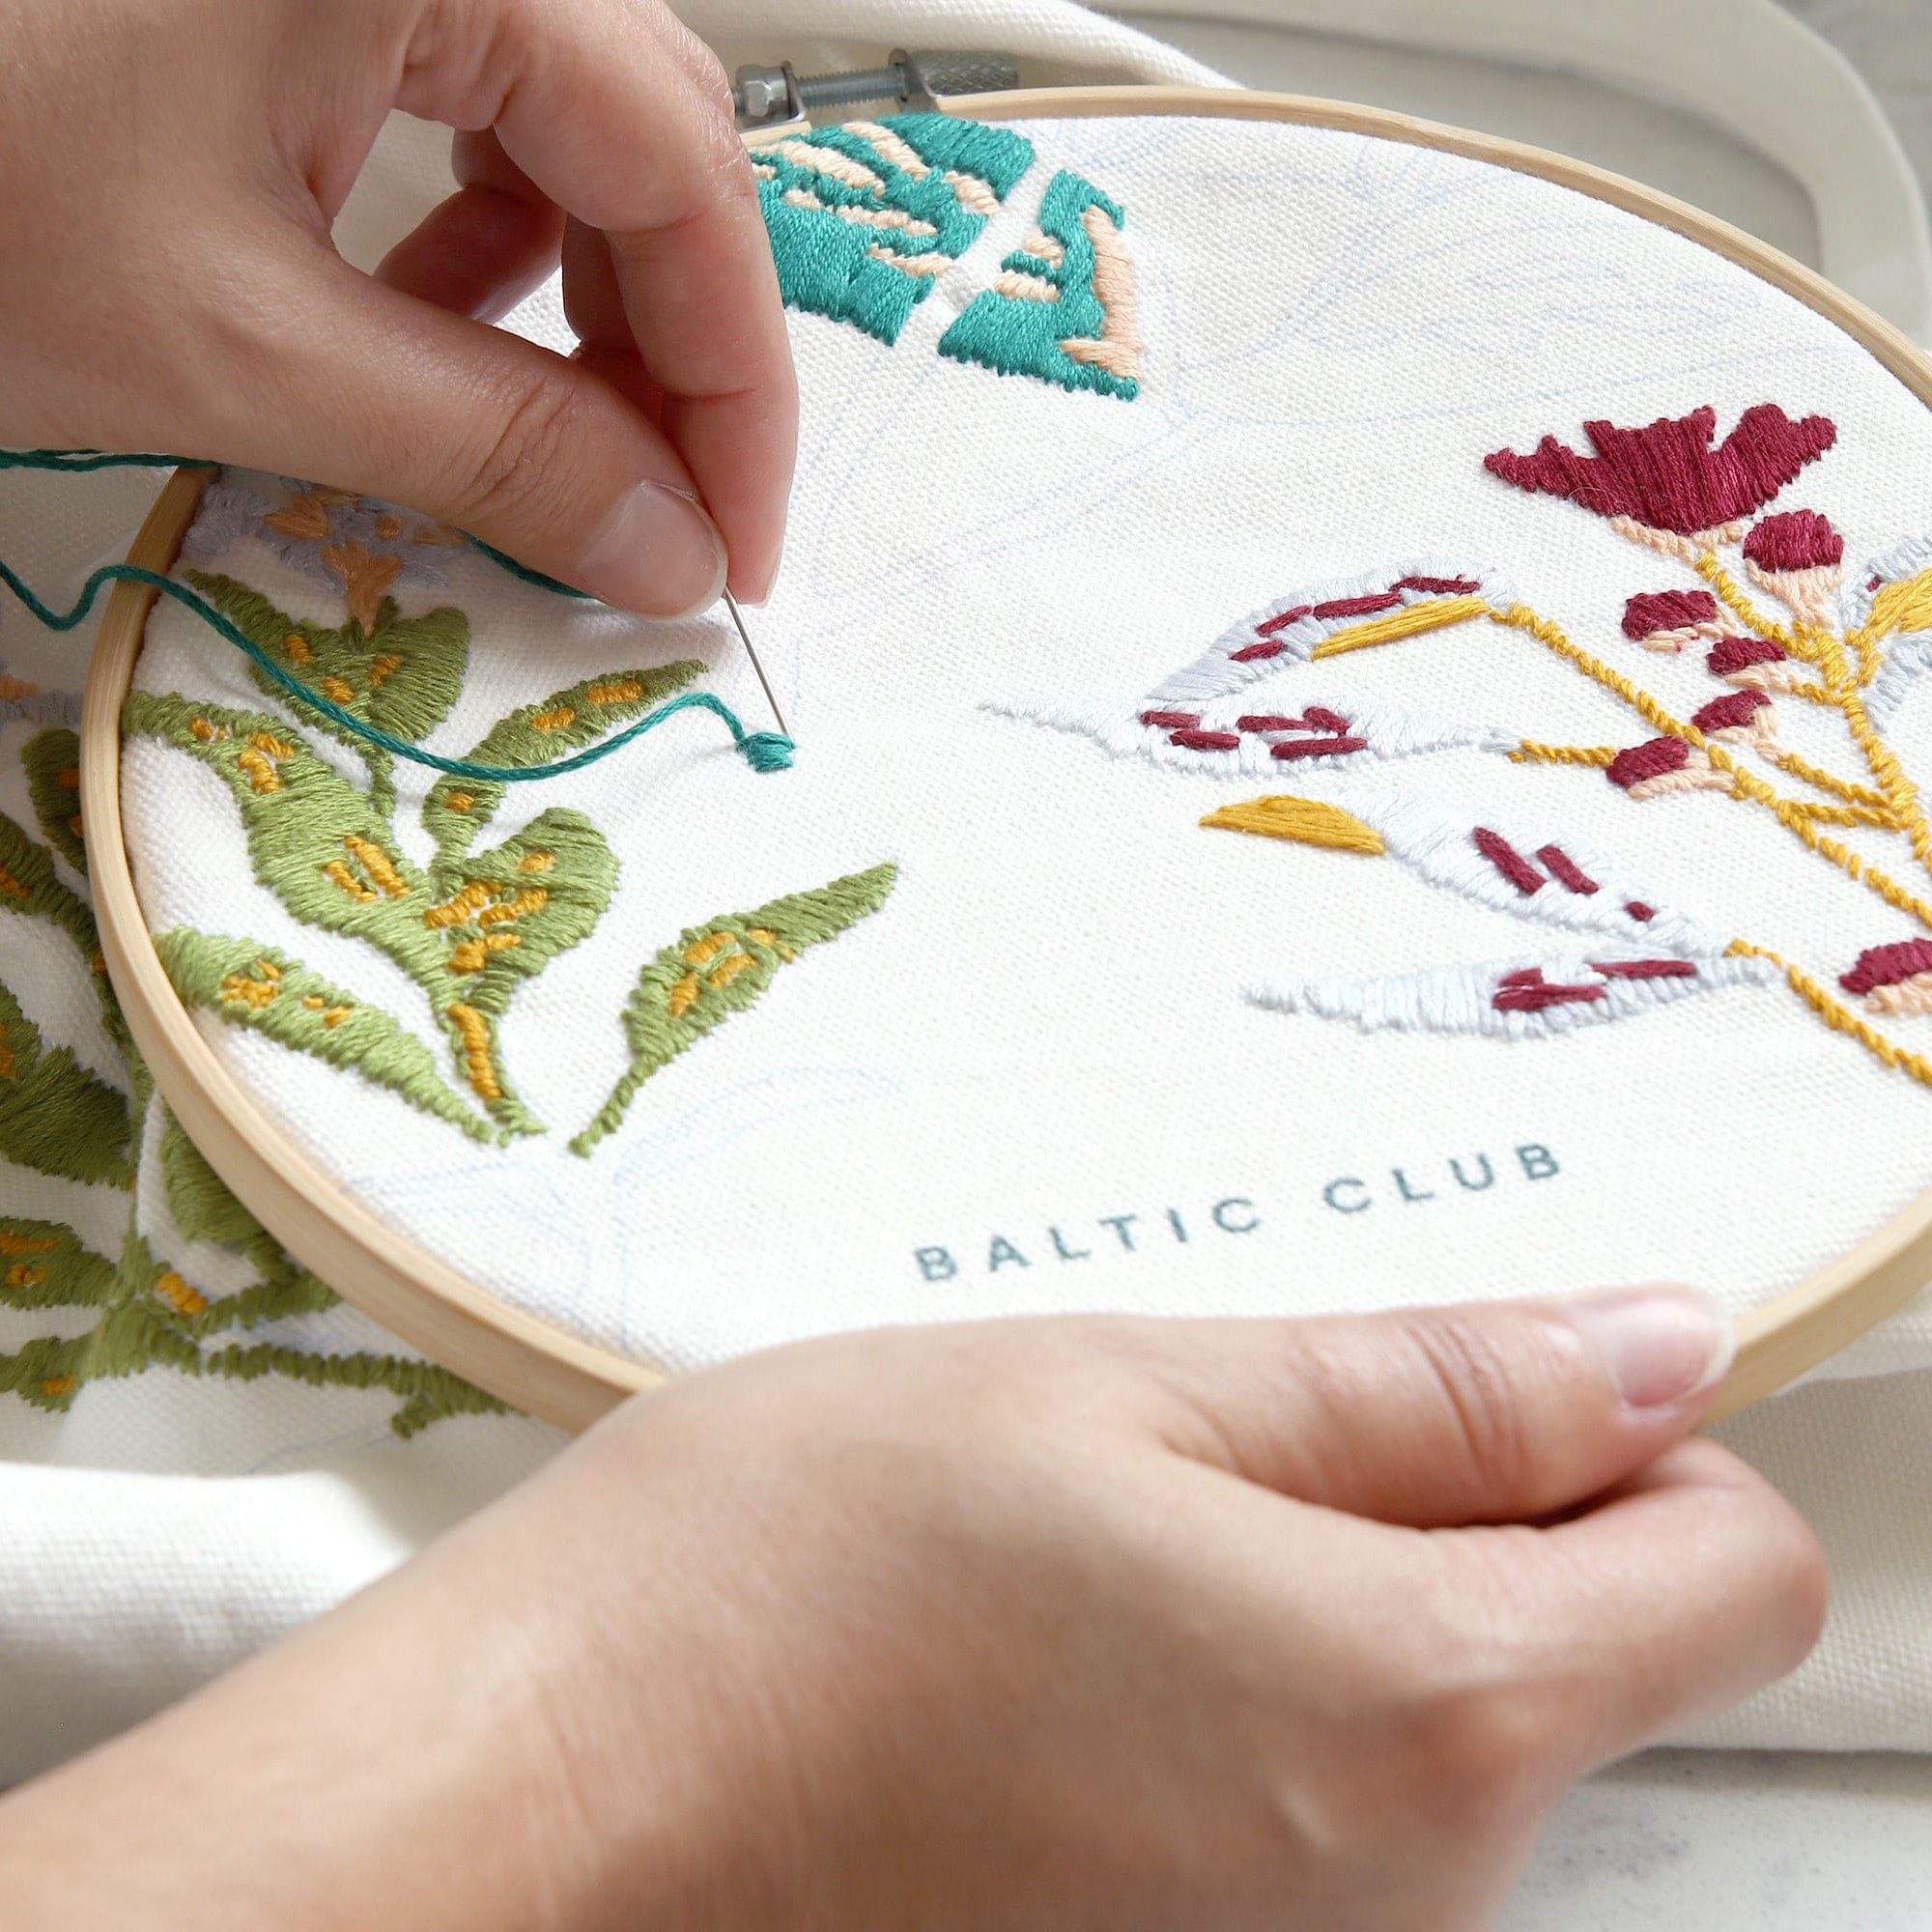 Closeup of the embroidery process making a tote bag thanks to the Embroidery Kit by The Baltic Club